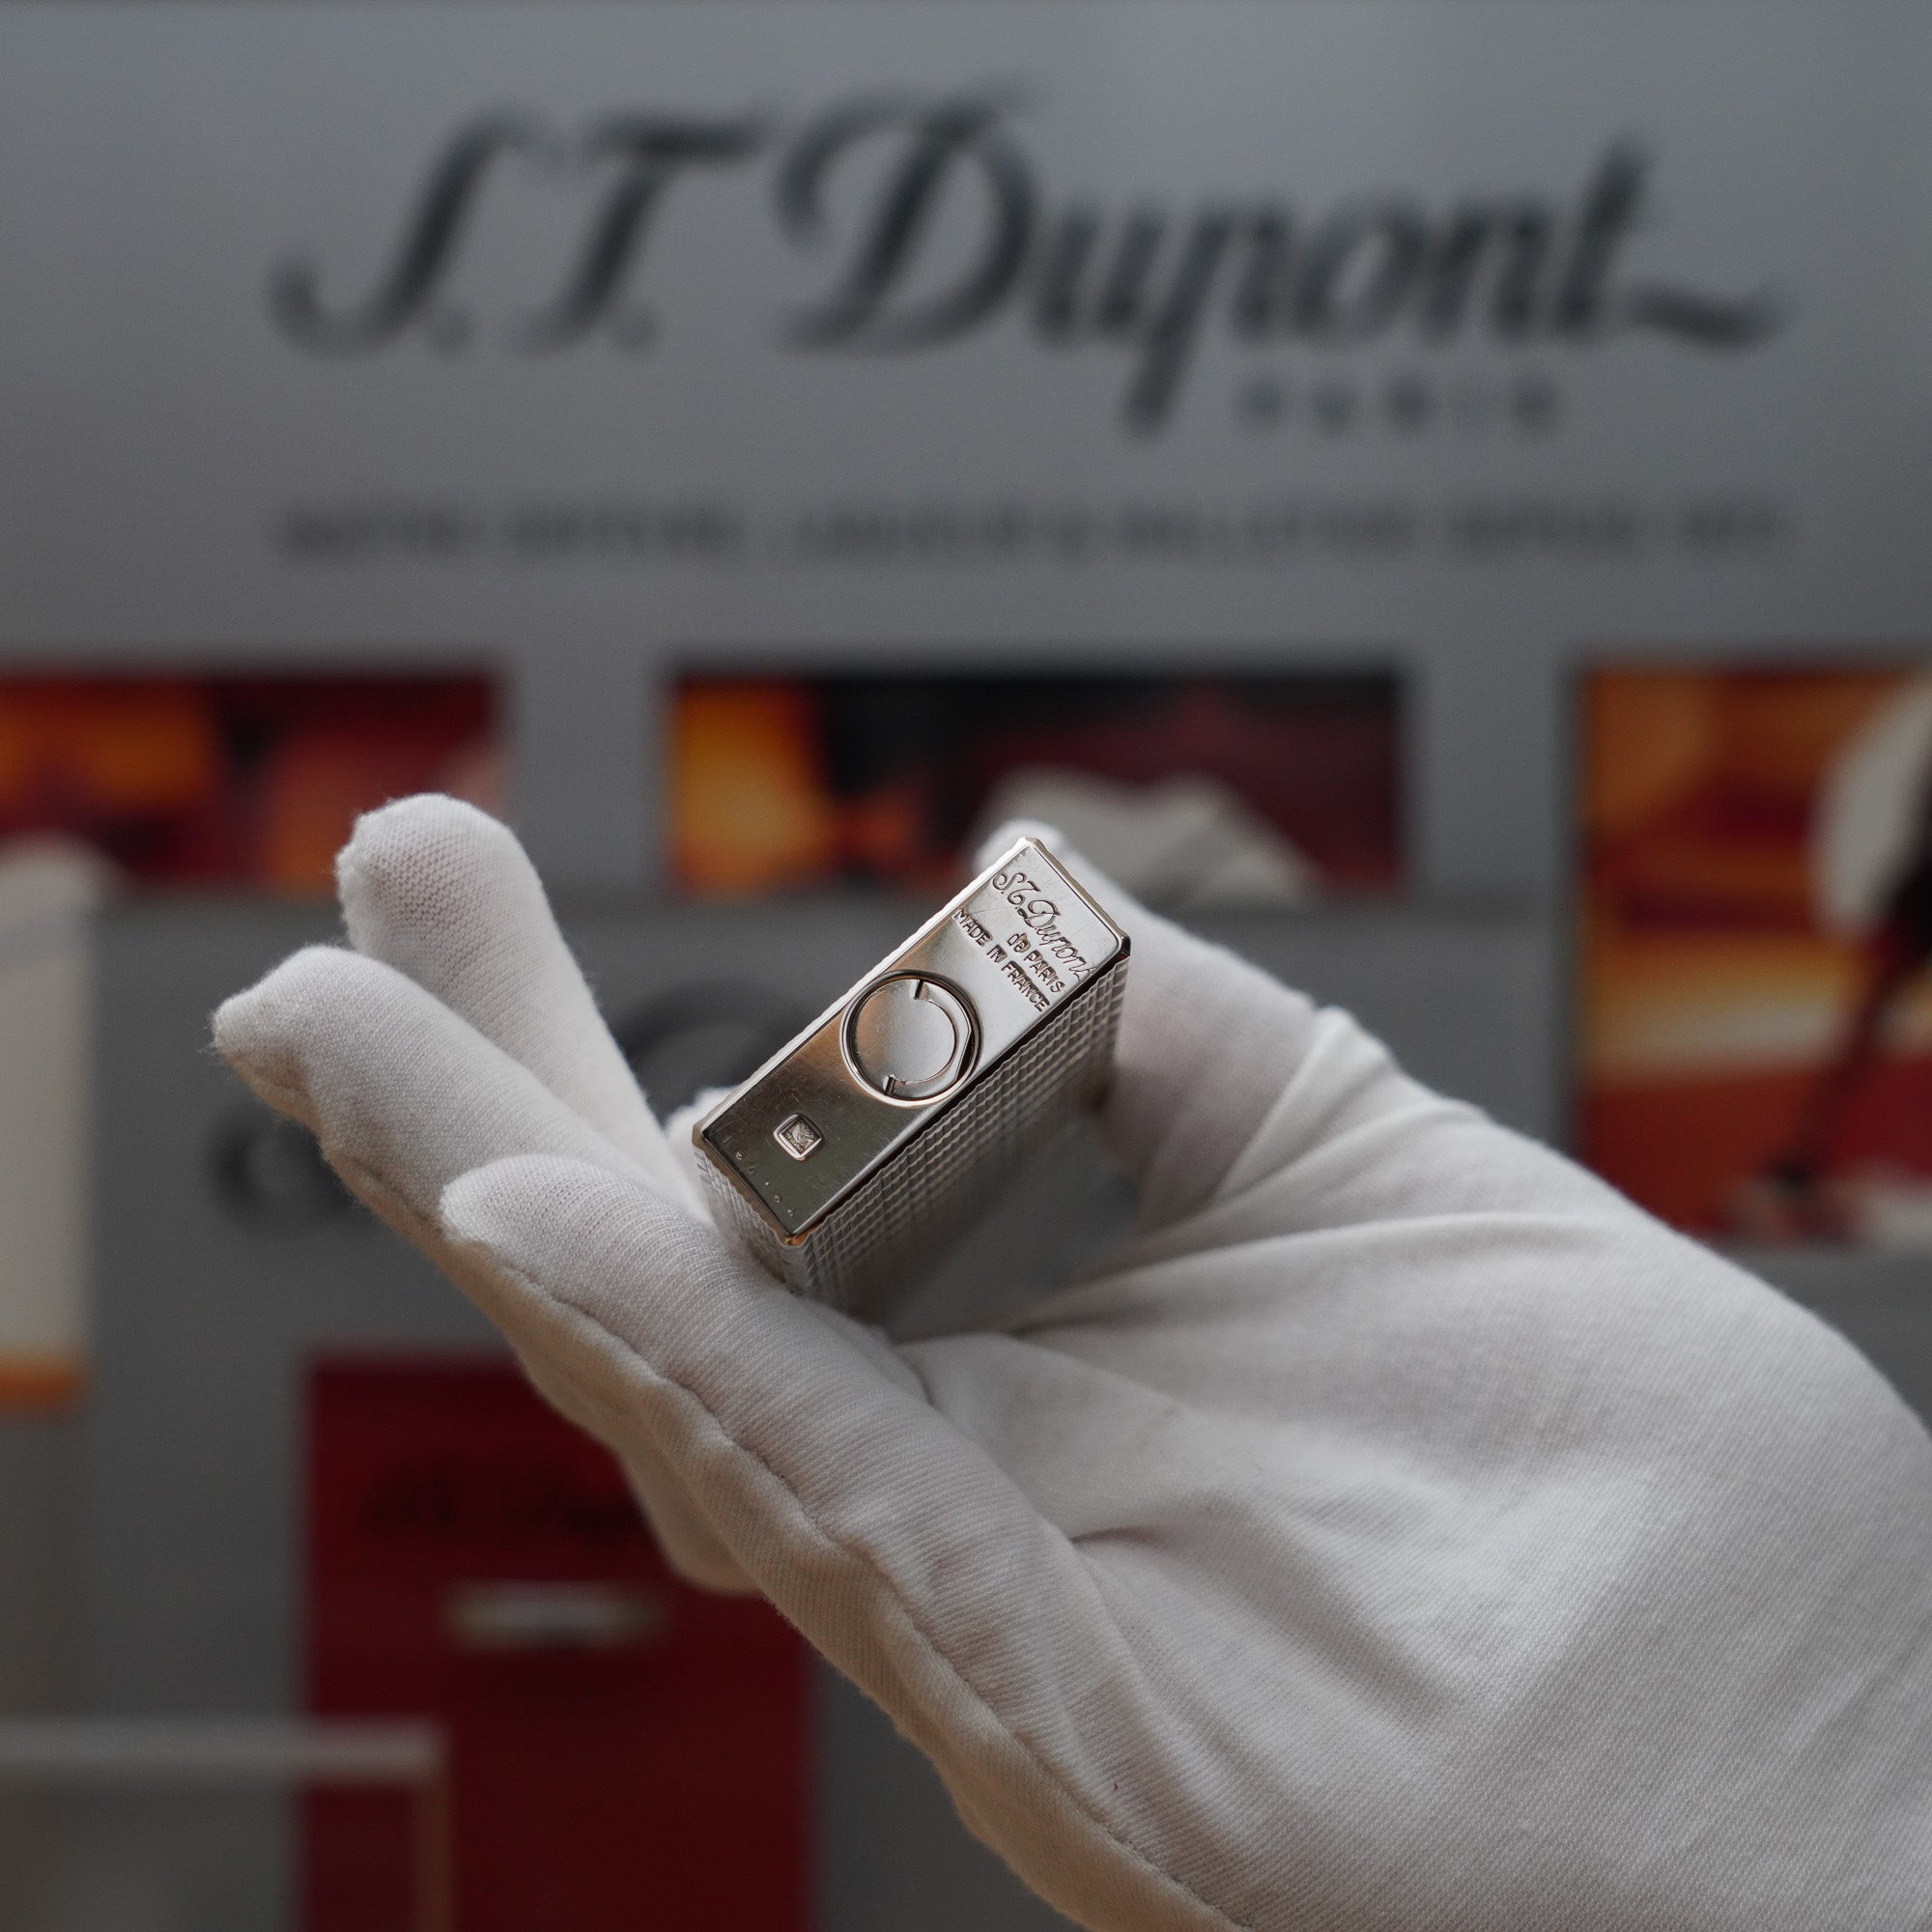 A Vintage 1970 S.T. Dupont Silver Plated Ligne 1 Rare lines pattern Table Lighter being held in front of S.T. Dupont by a hand.